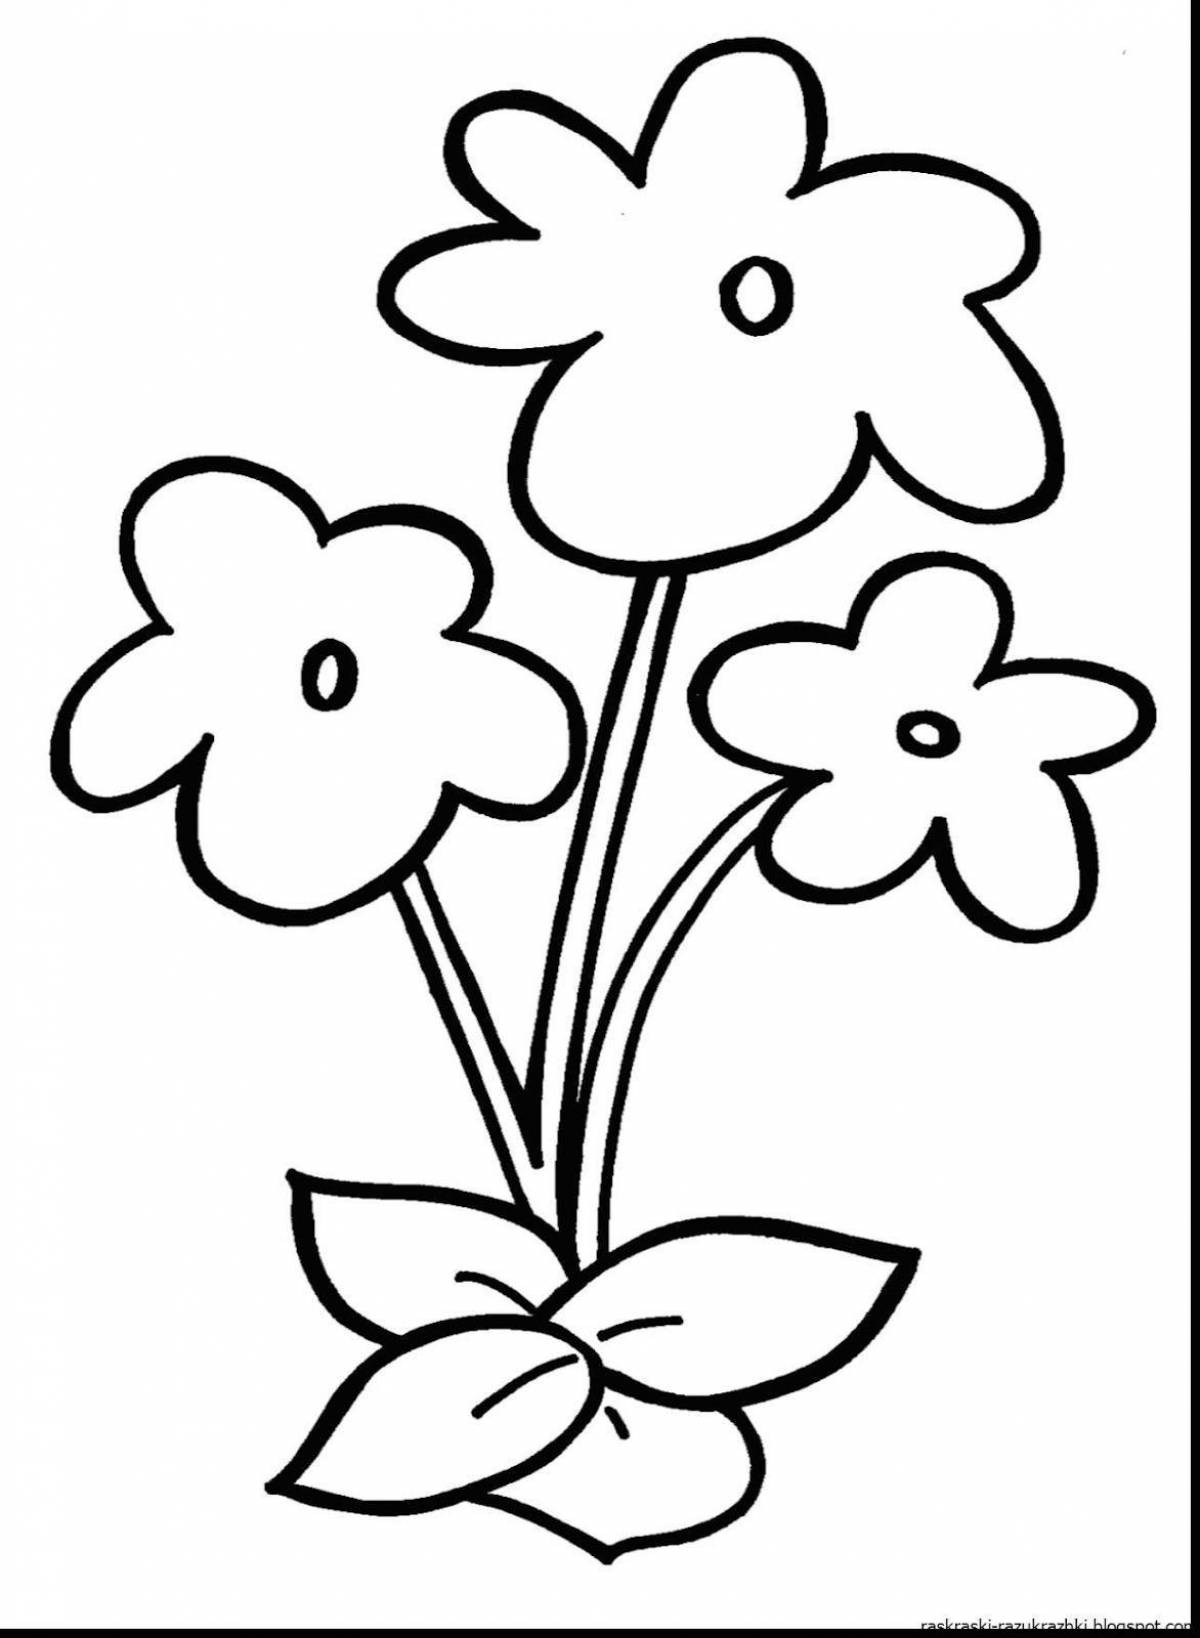 Incredible flower coloring book for toddlers 2 3 years old